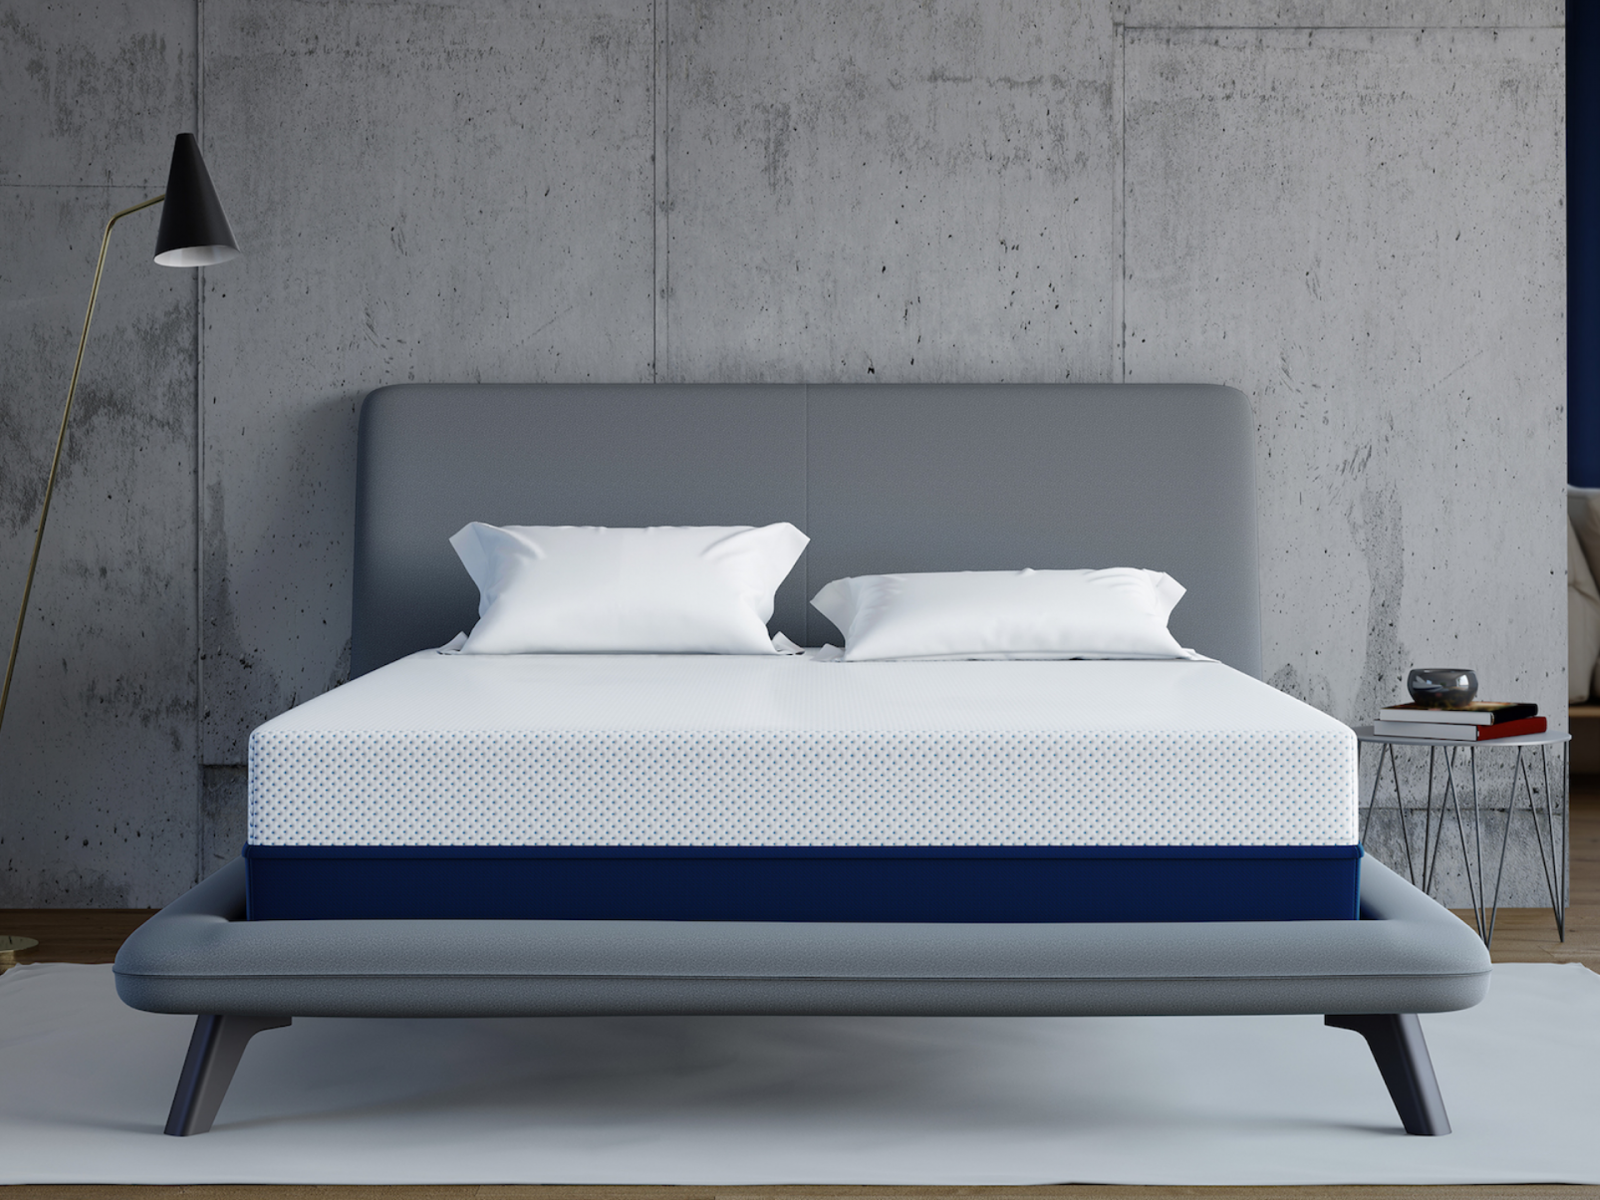 Best Mattress For Side Sleepers, Is Bed Frame Important Reddit